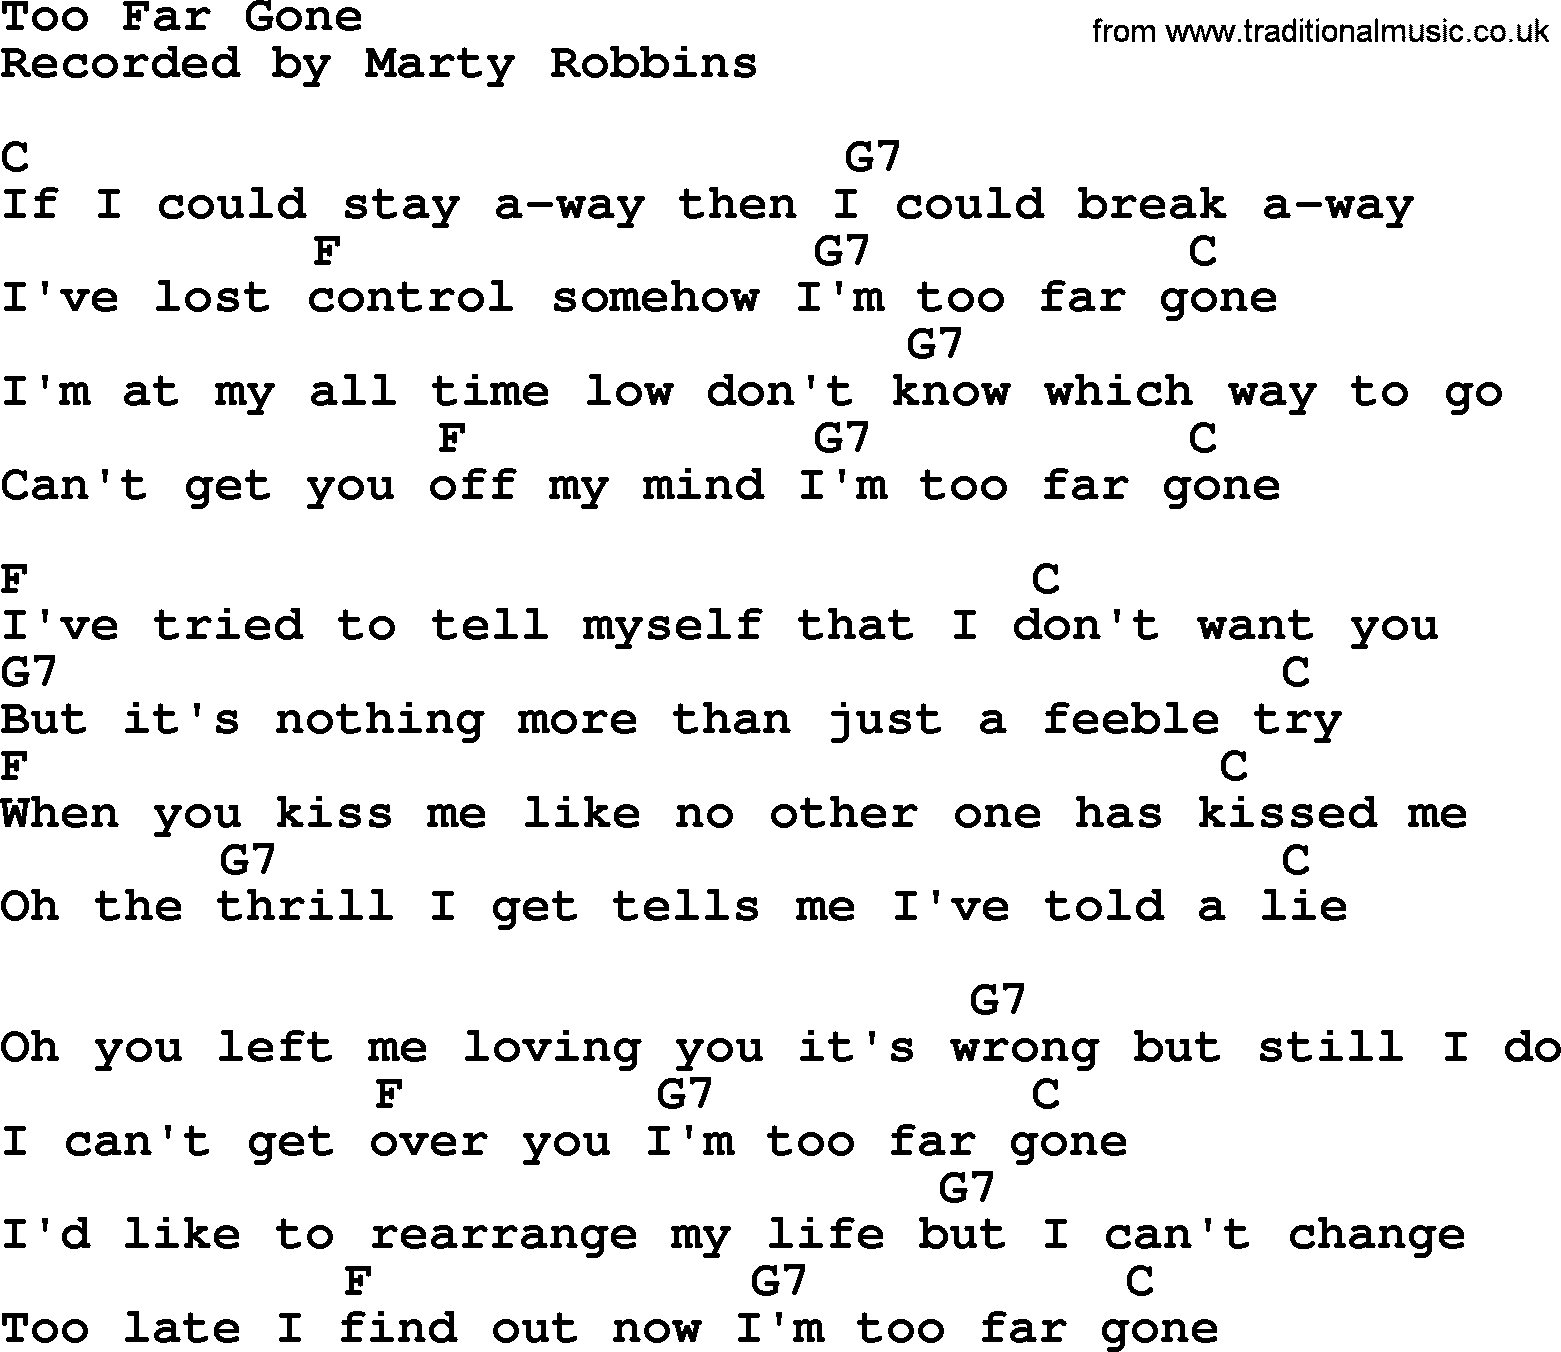 Marty Robbins song: Too Far Gone, lyrics and chords